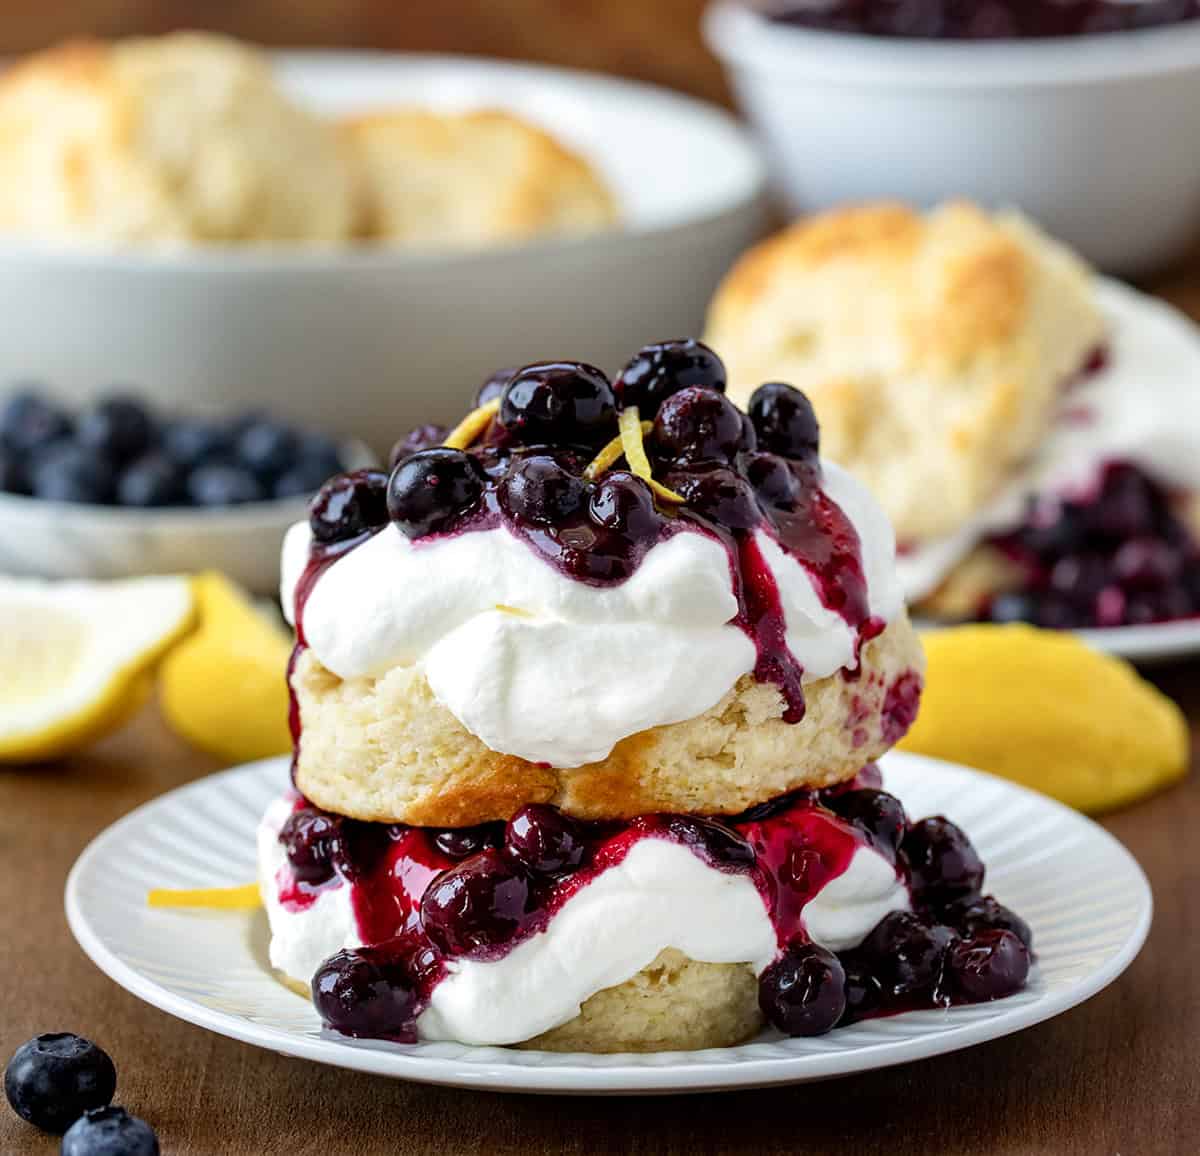 Lemon Blueberry Shortcake on a white plate with lemon zest and more ingredients in background.